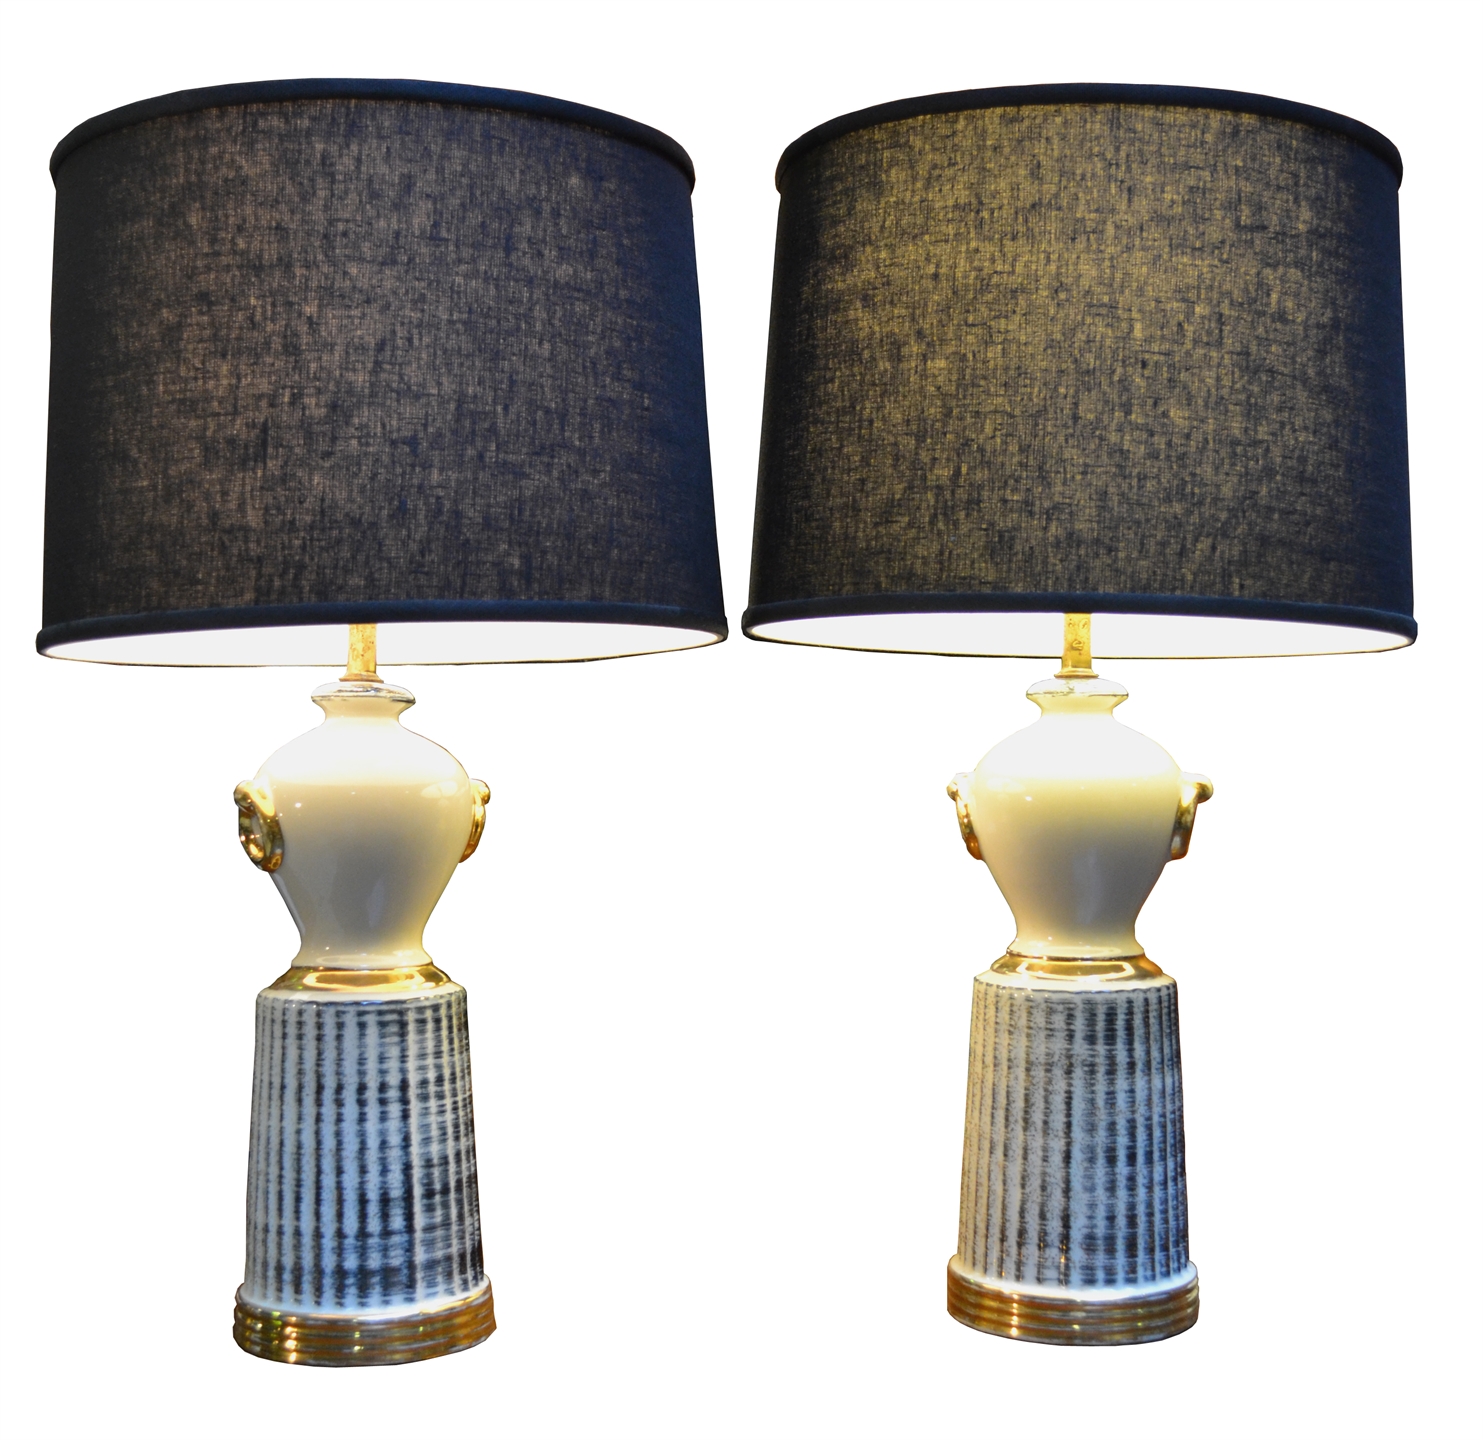 MB/3058 - Pair of Ivory, Black and Gold Lamps